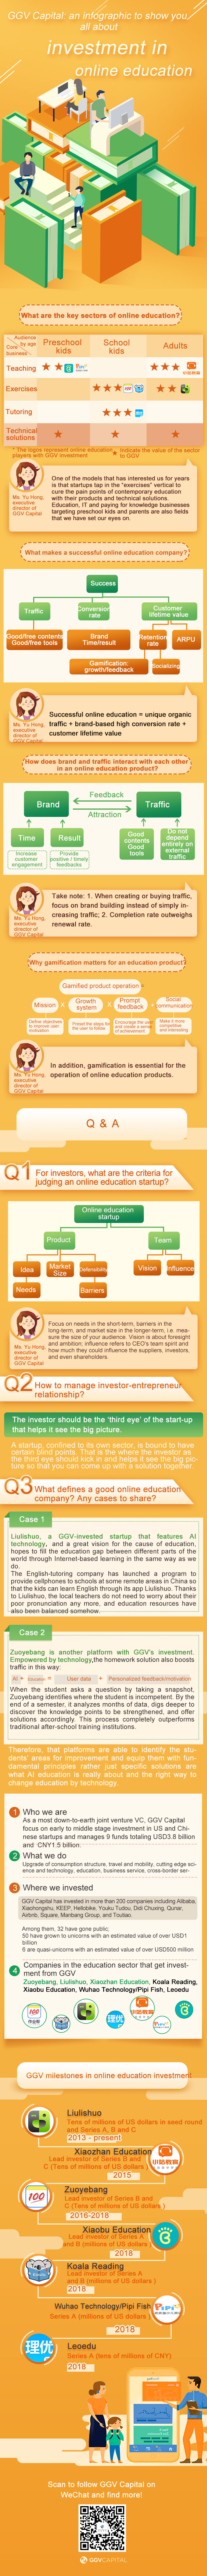 Infographic | GGV on investing education tech startups